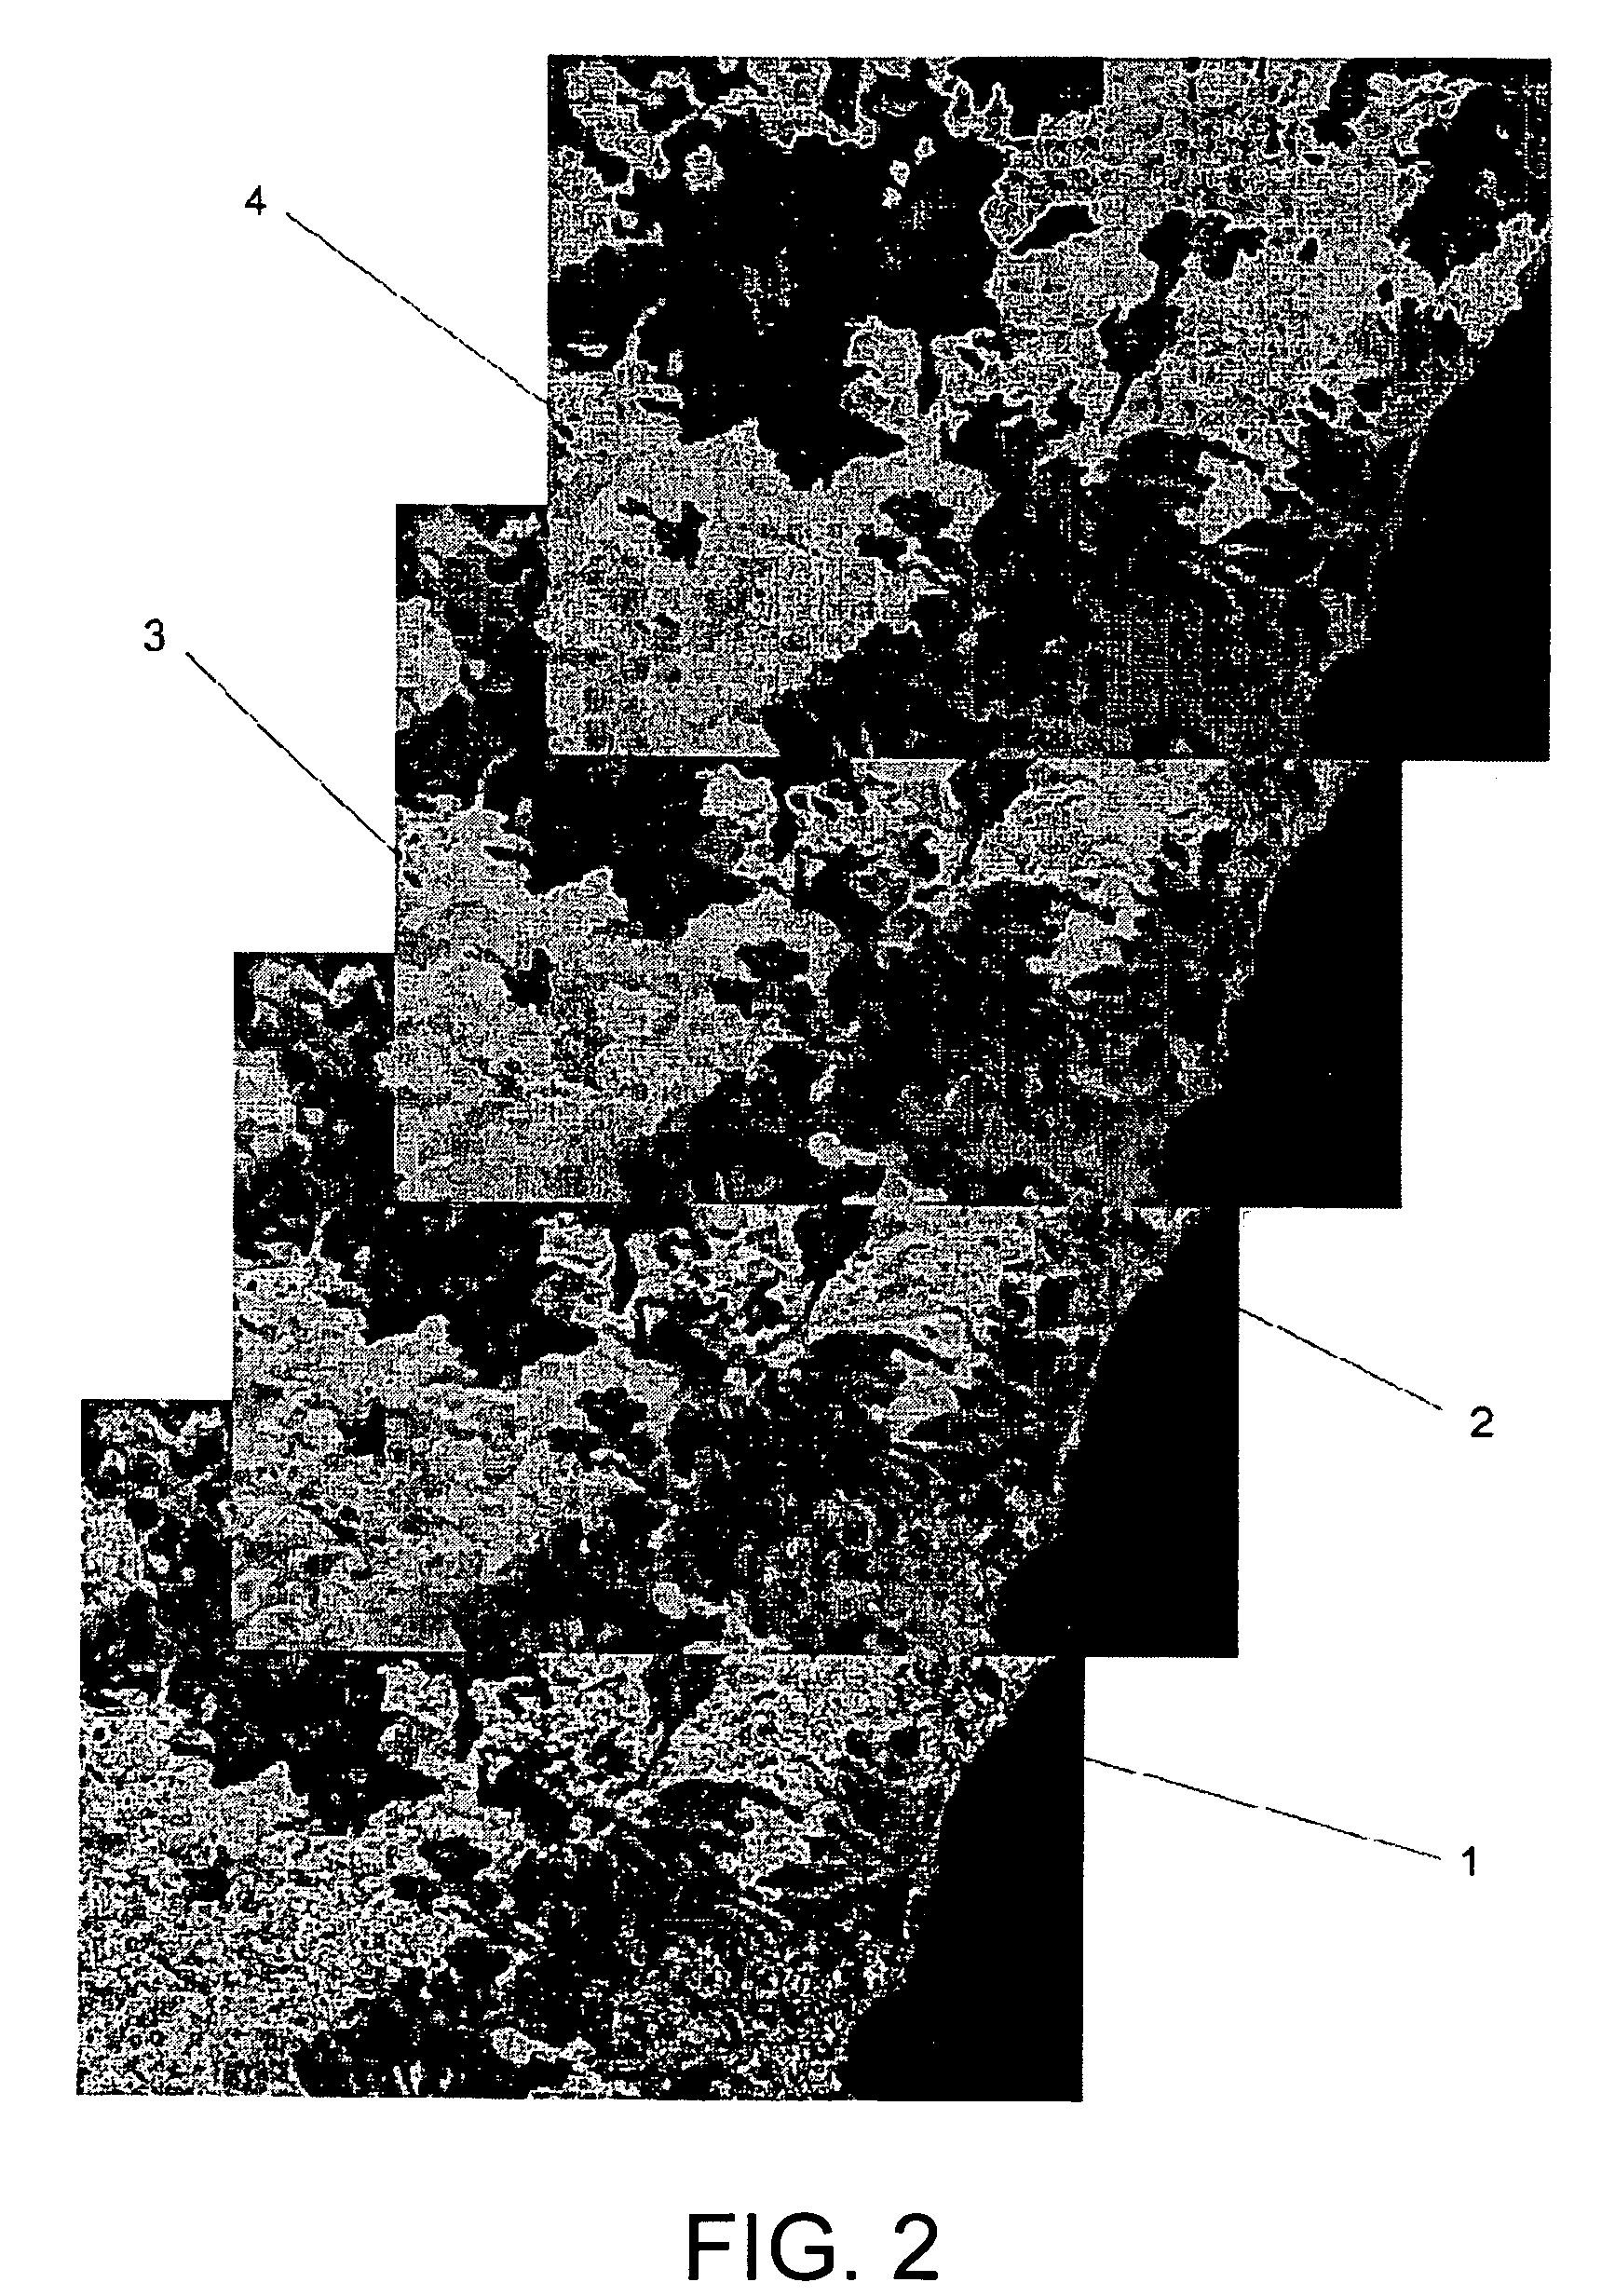 Method for processing data structures